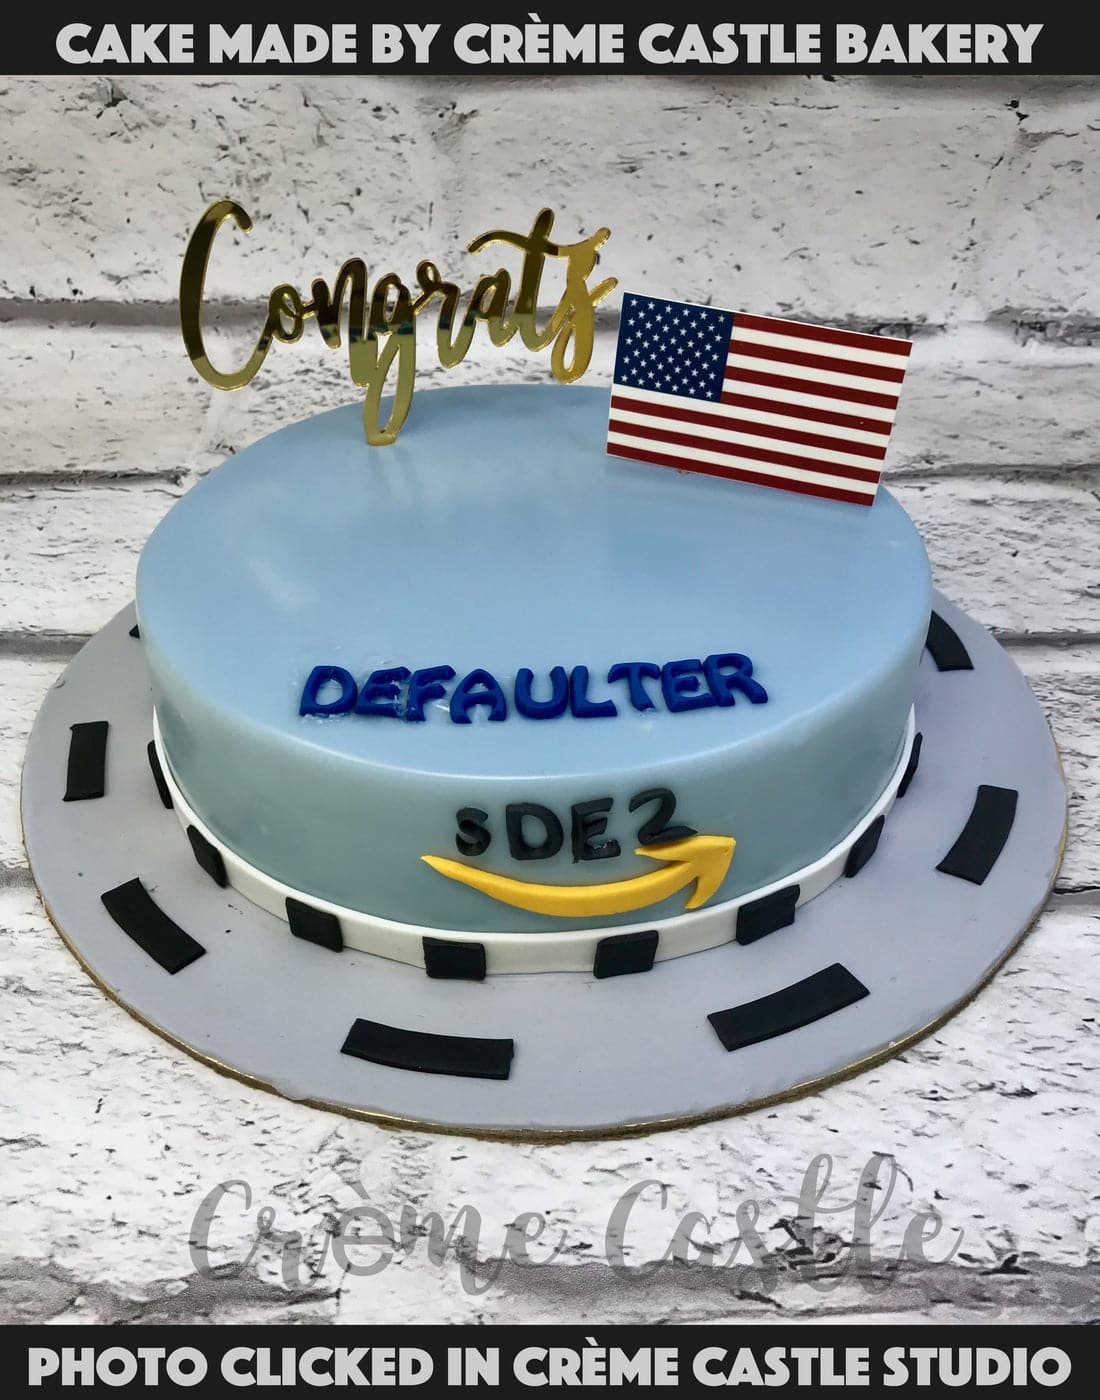 Online Cake Delivery in USA | Send Cakes to USA - IGP